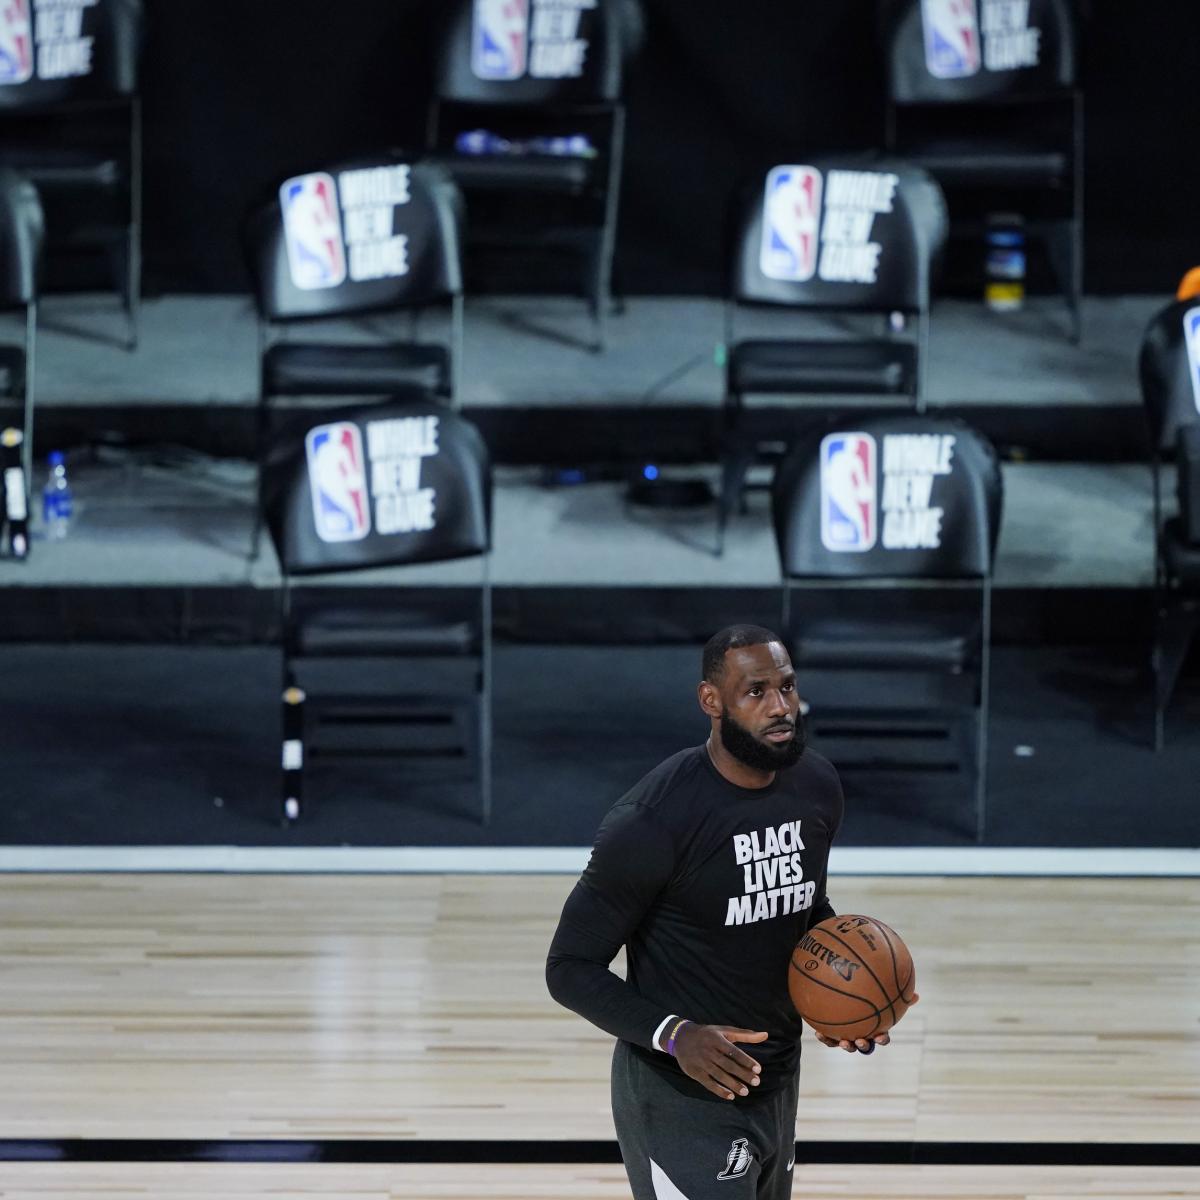 Lakers’ LeBron James Feedback on Missing His Family While Playing in NBA Bubble